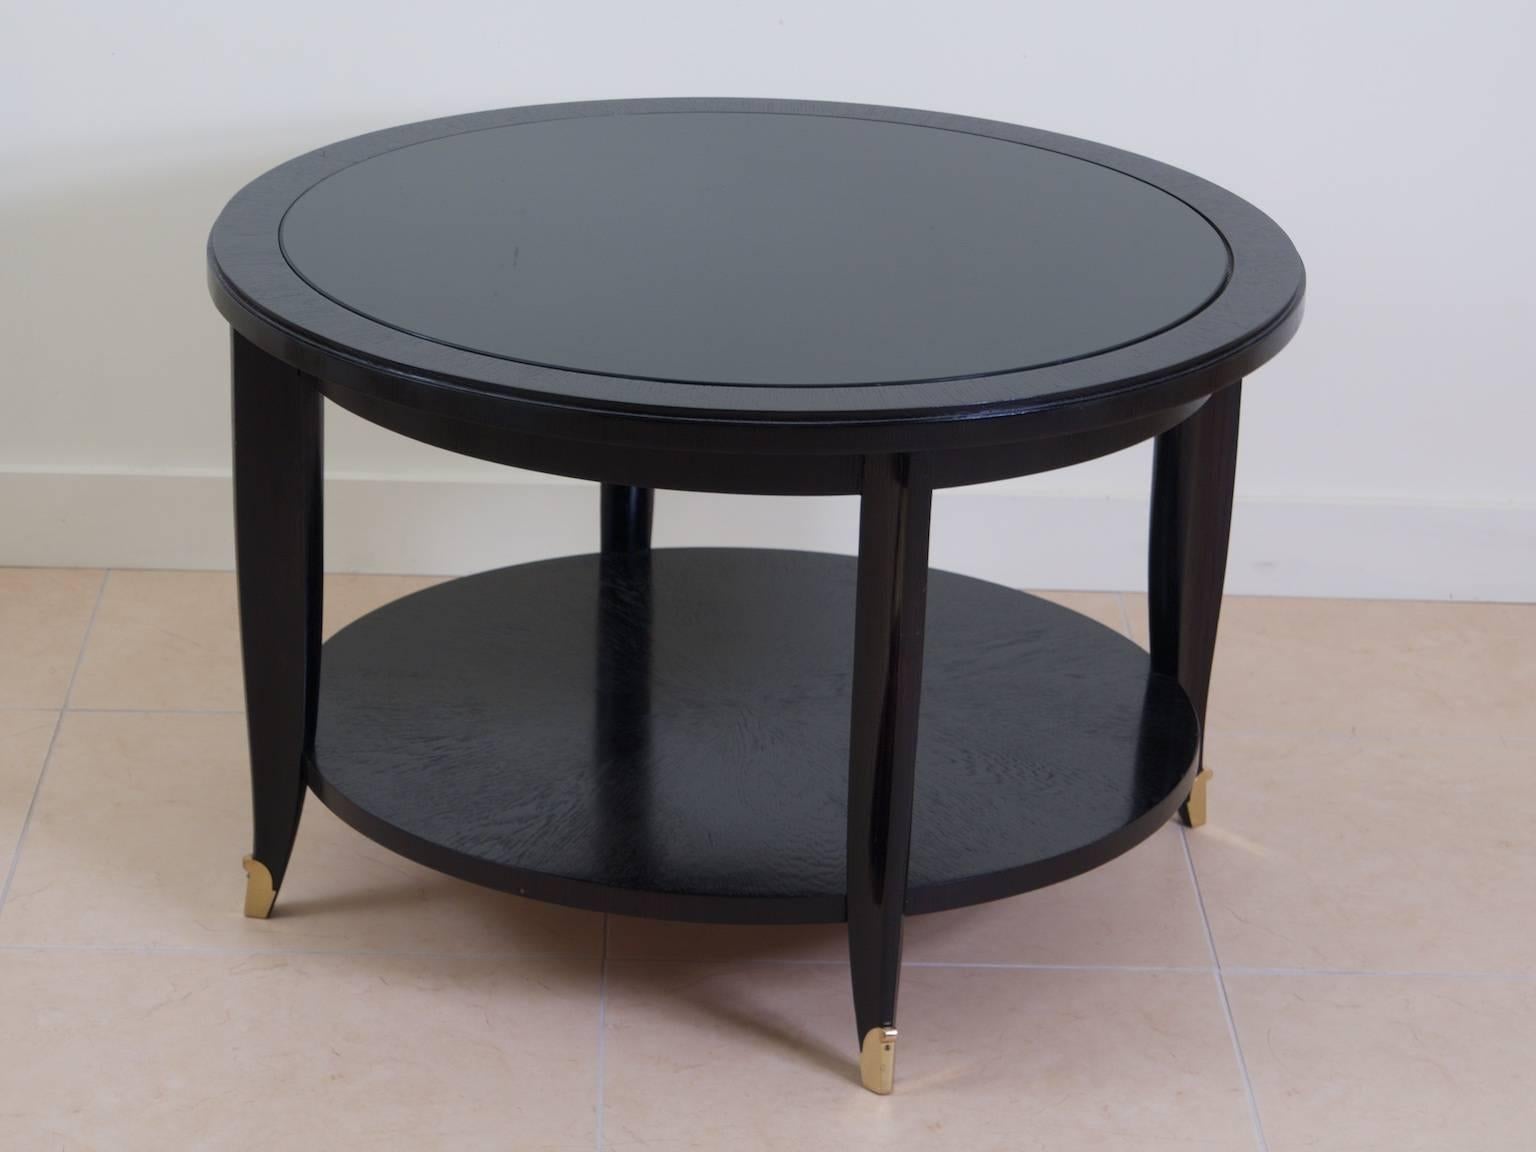 French 1940s Art Deco coffee or side table in ebonized wood with nickeled bronze mounts, French, circa 1945.